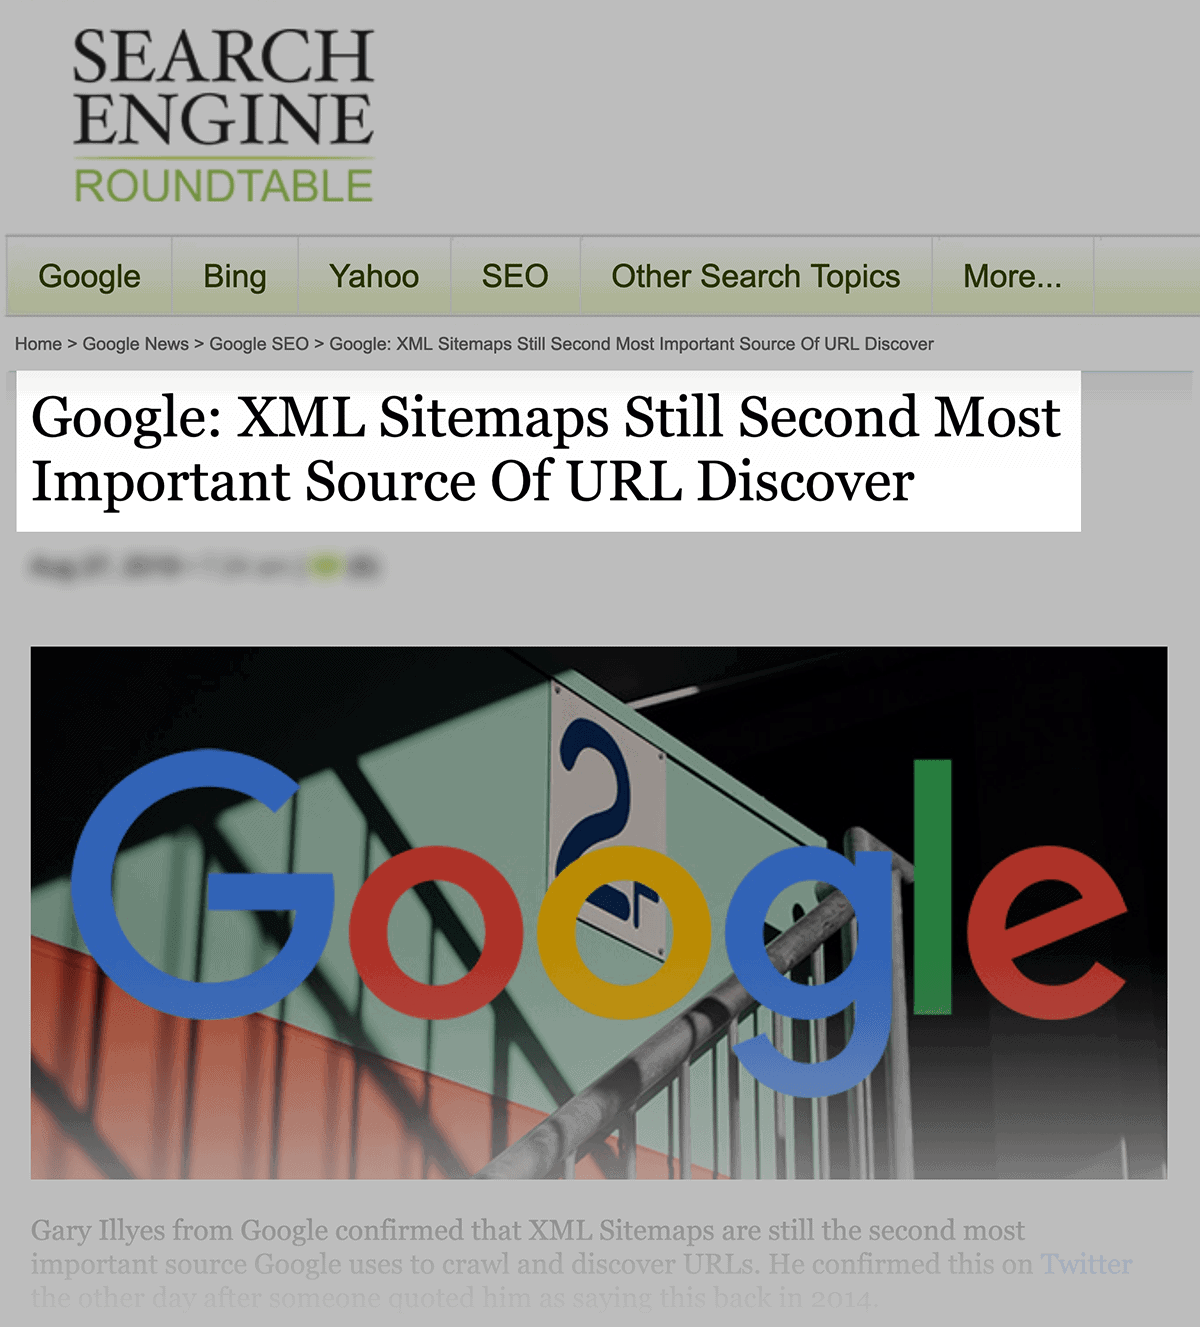 Google: XML Sitemaps are the second most important source